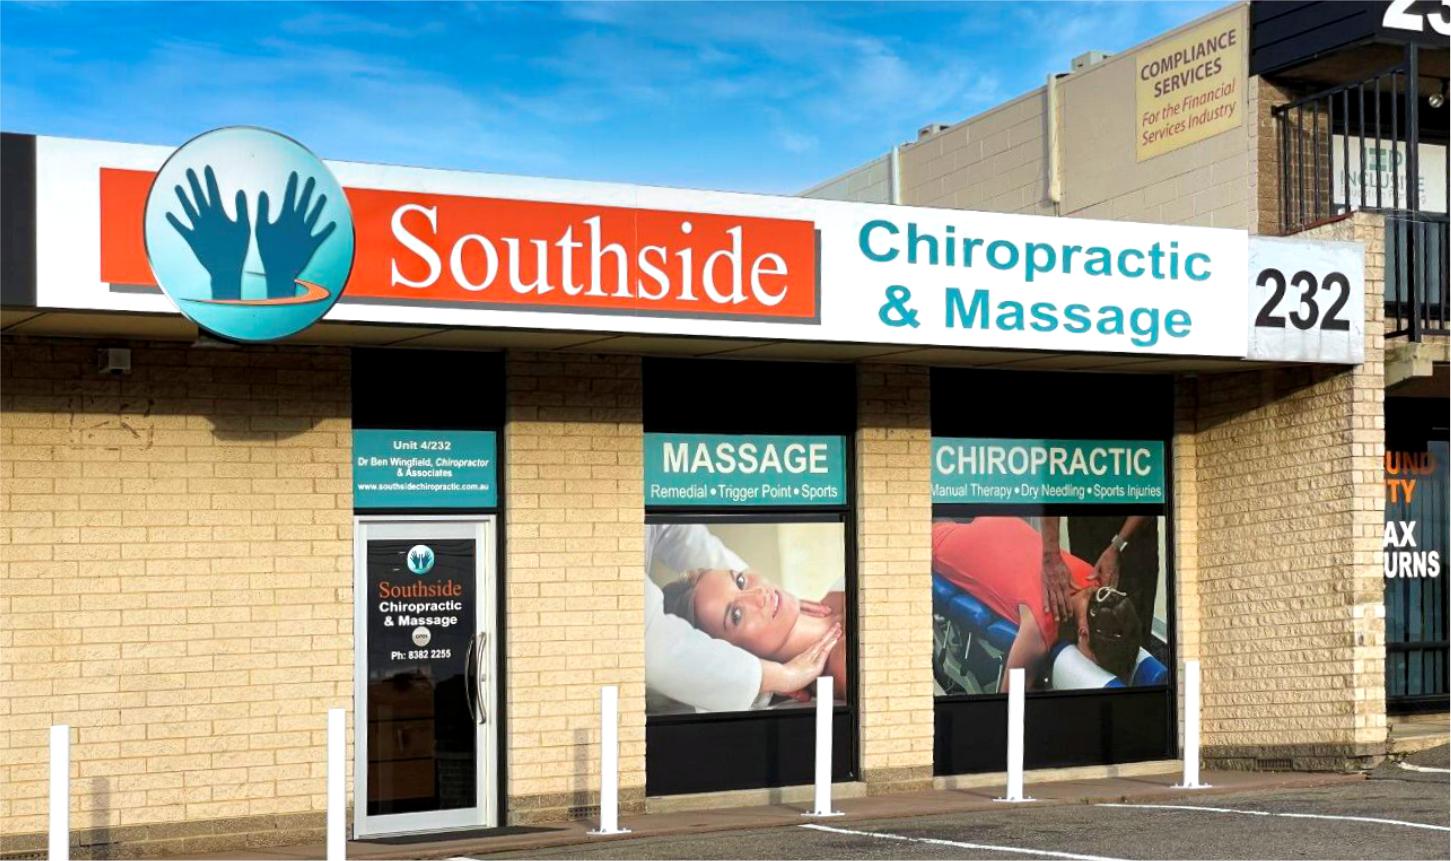 Southside Health Care, Chiropractic and Massage